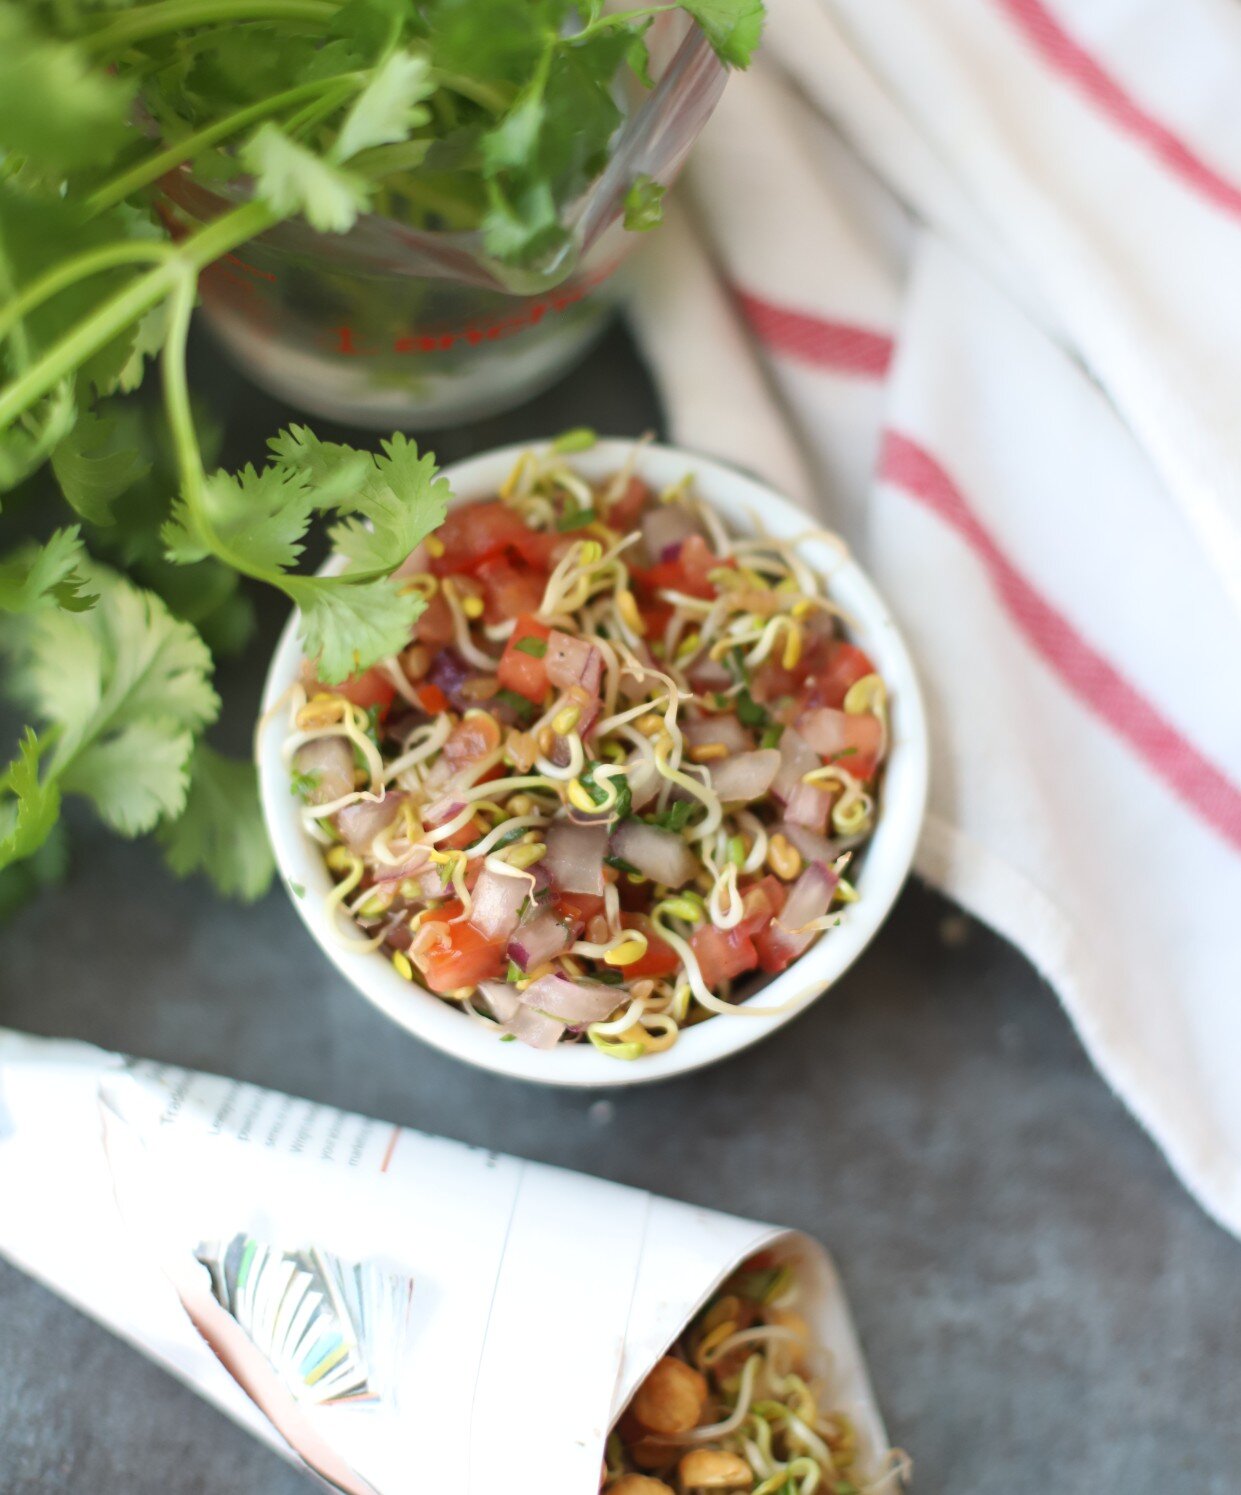 Sprouted Fenugreek Salad